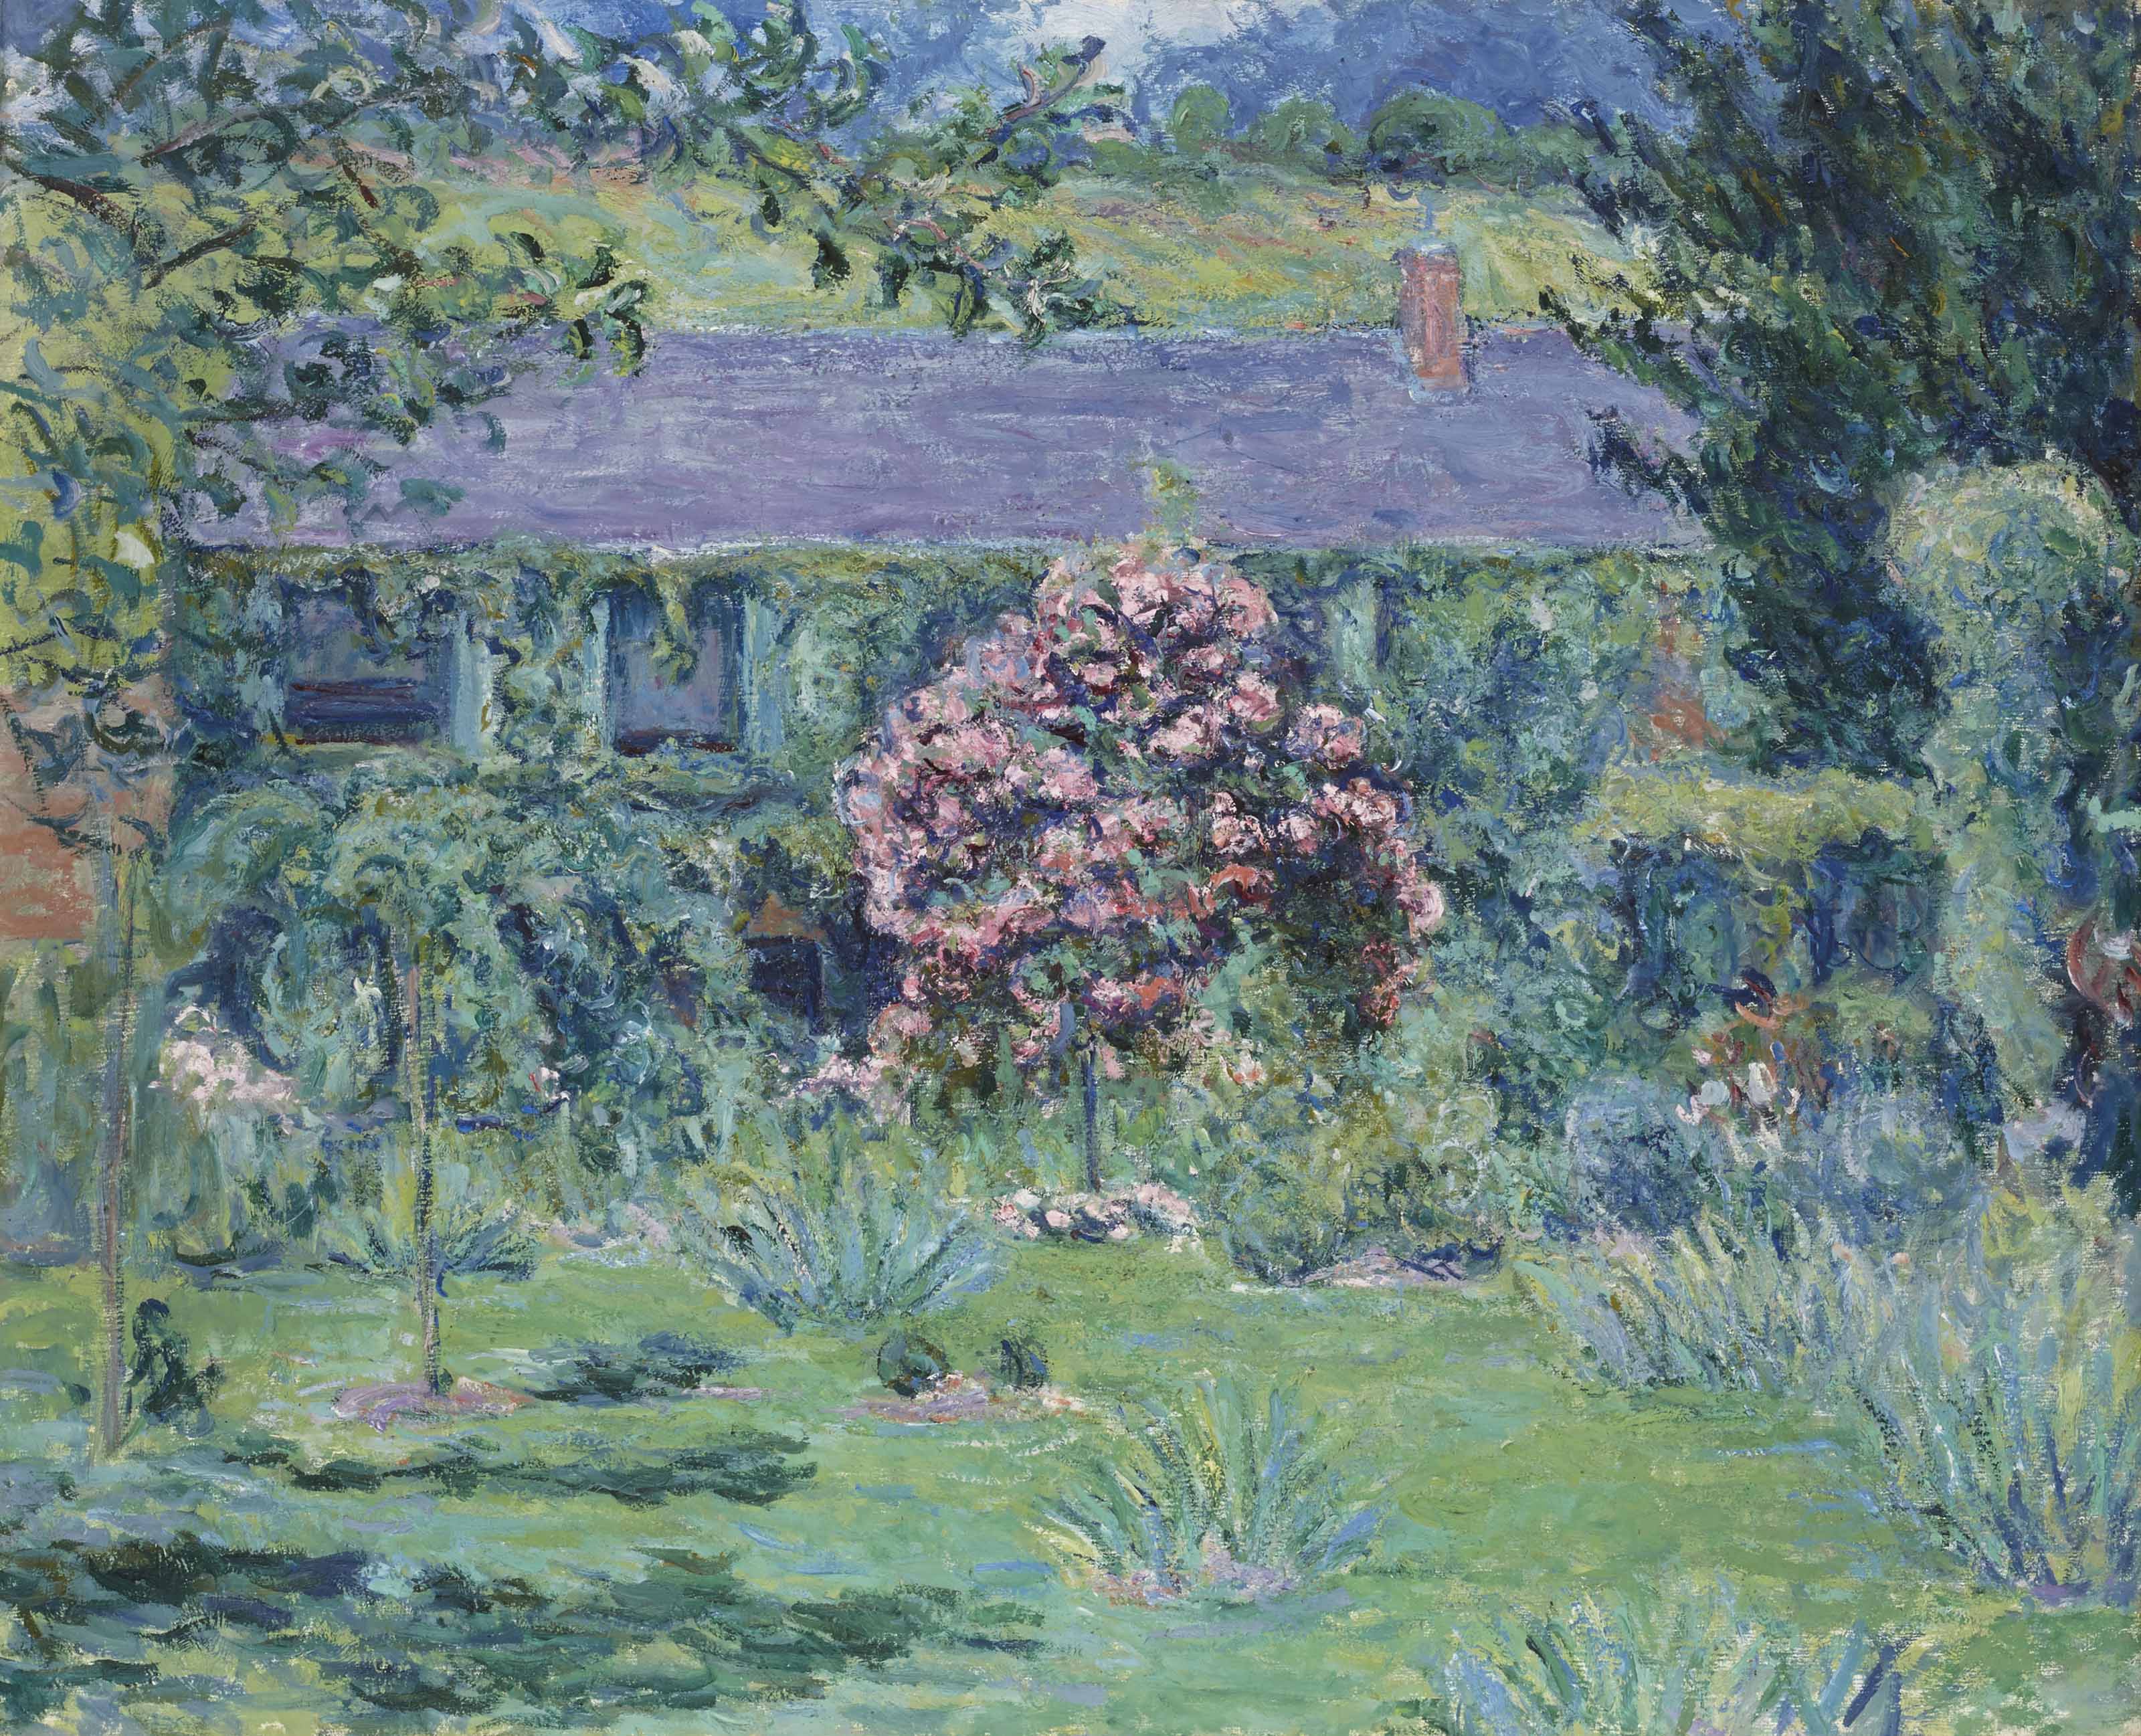 Monets Haus in Giverny by Blanche Hoschedé Monet - 59,4 x 72,8 cm Private Sammlung